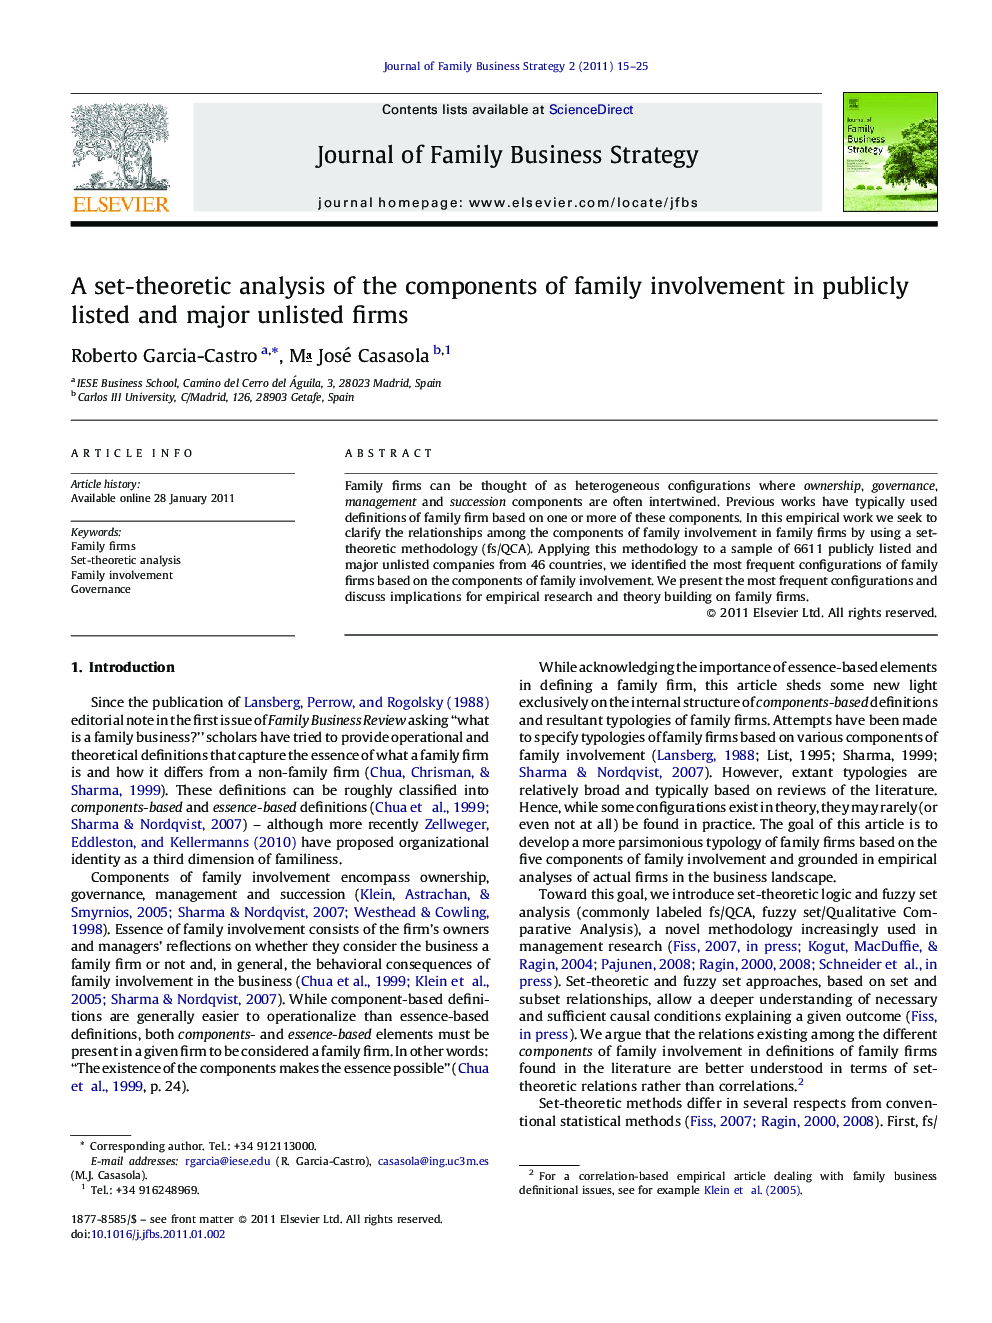 A set-theoretic analysis of the components of family involvement in publicly listed and major unlisted firms